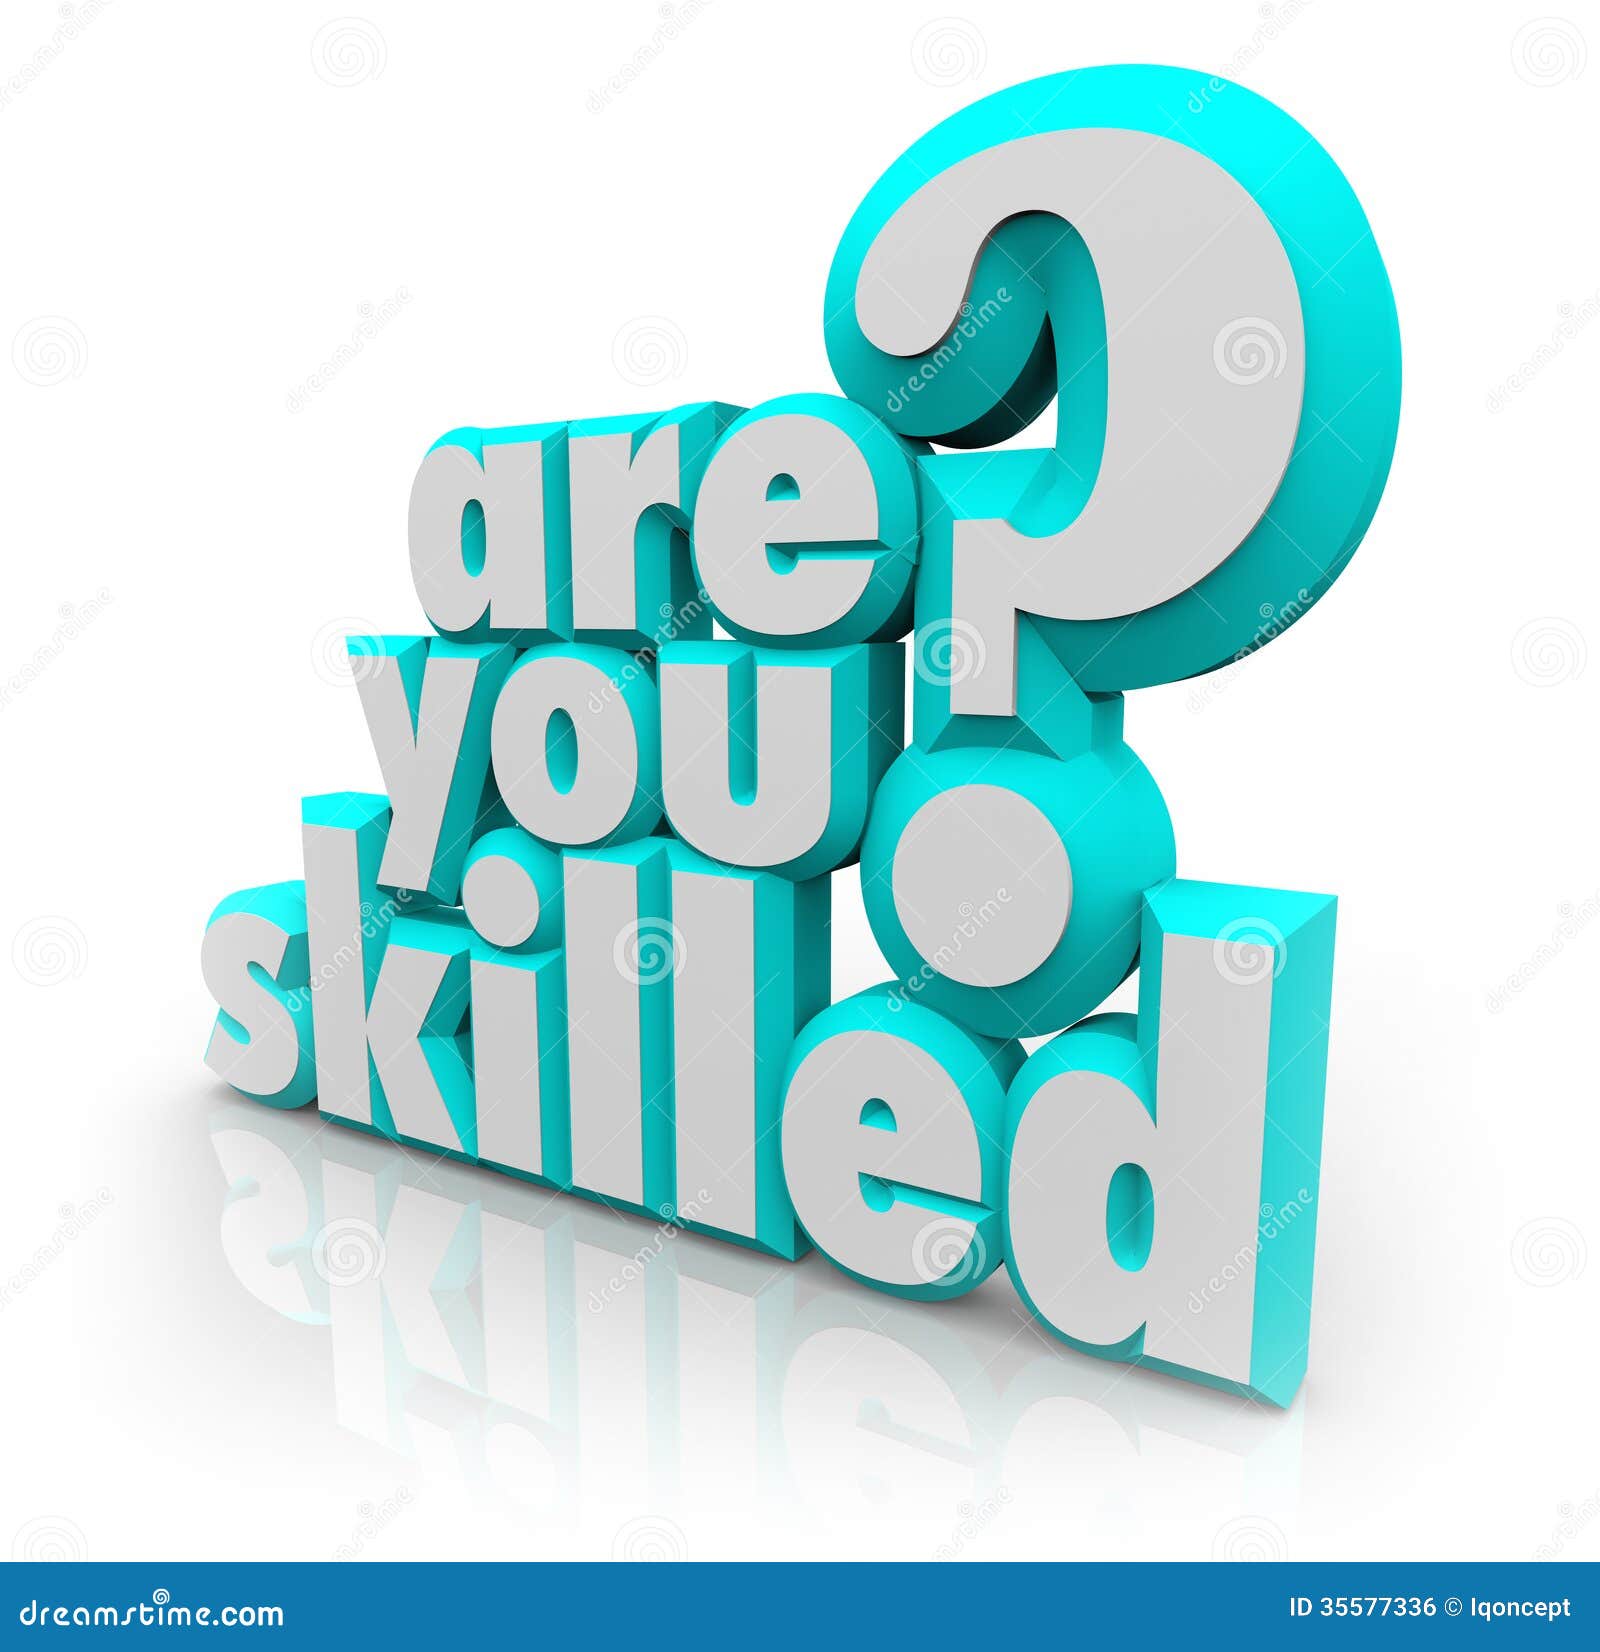 are you skilled words question training abilities